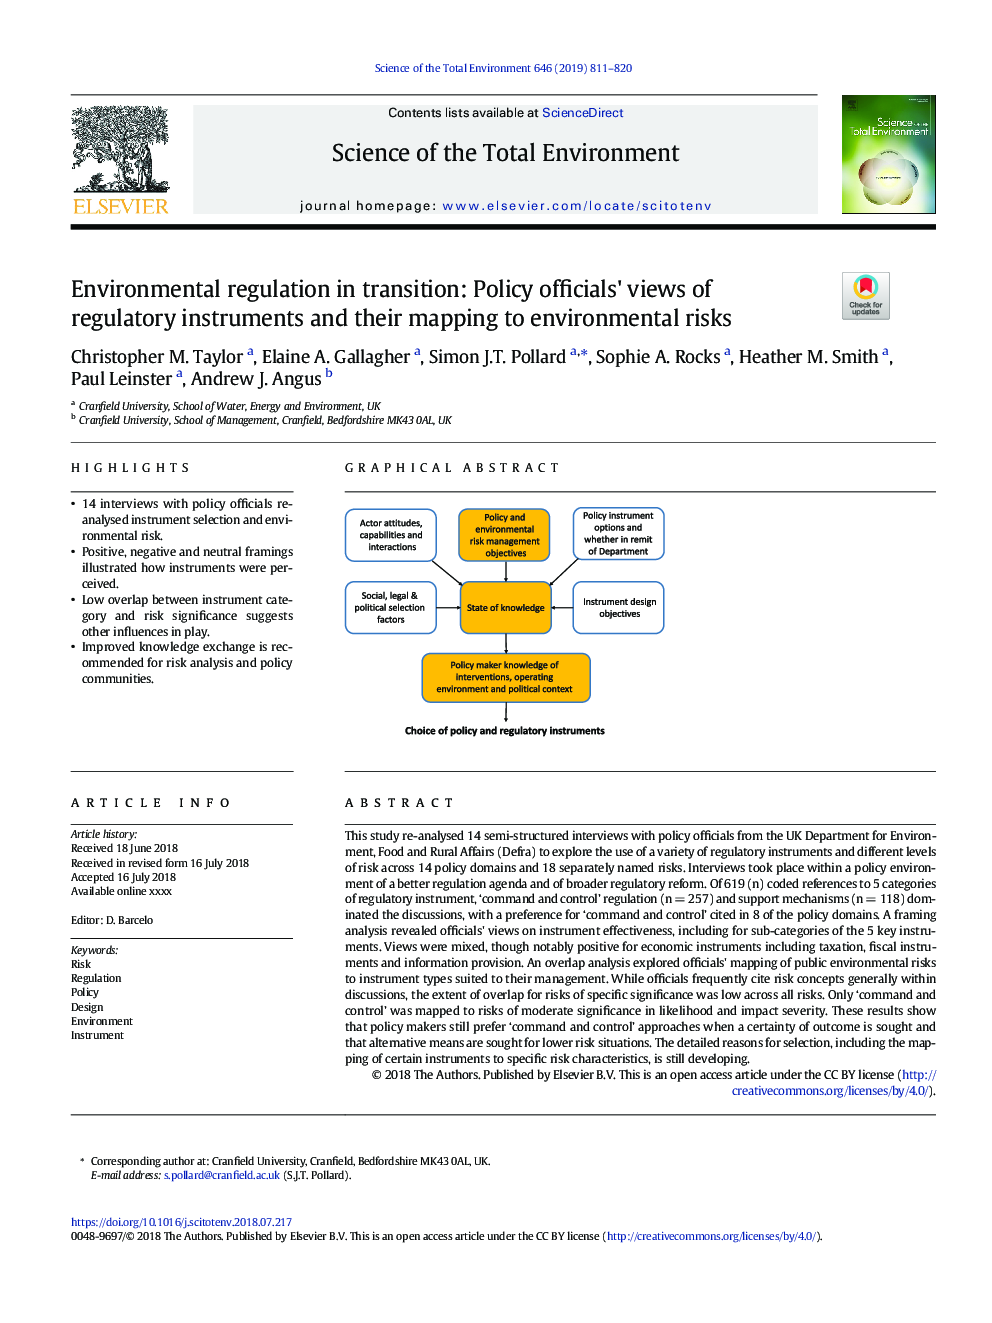 Environmental regulation in transition: Policy officials' views of regulatory instruments and their mapping to environmental risks